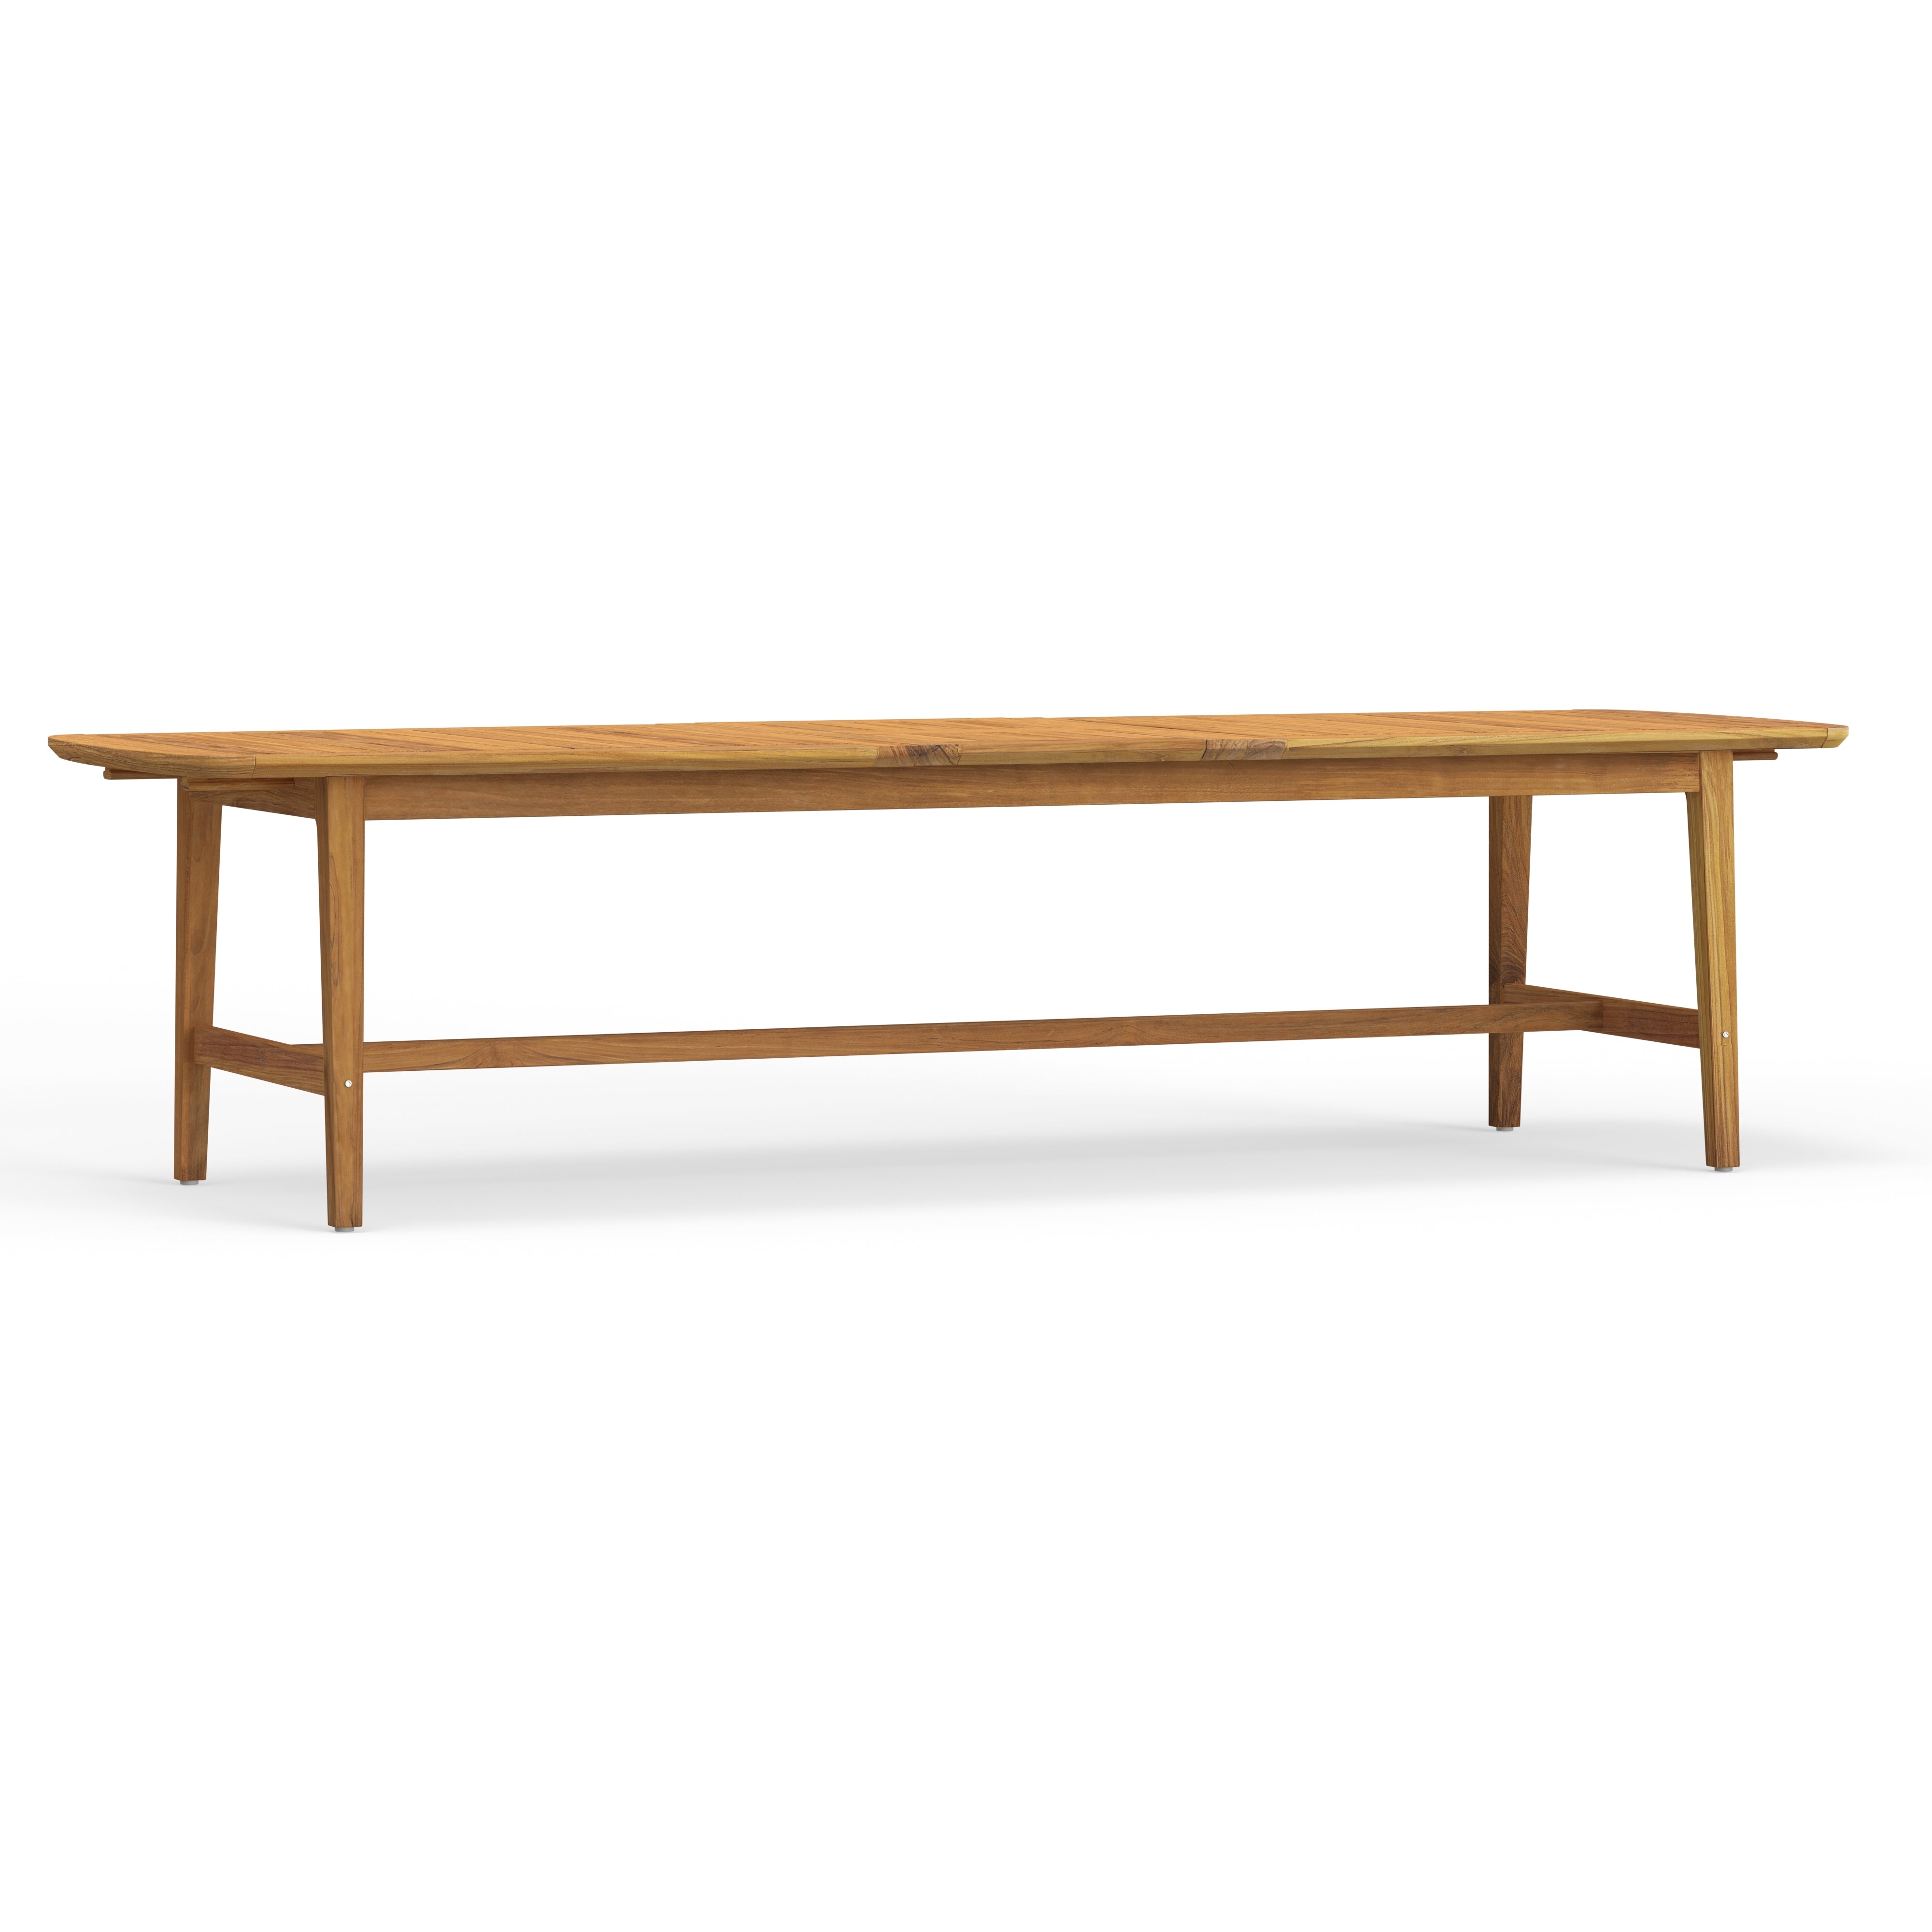 Best Quality Teak Outdoor Dining Table That Extends